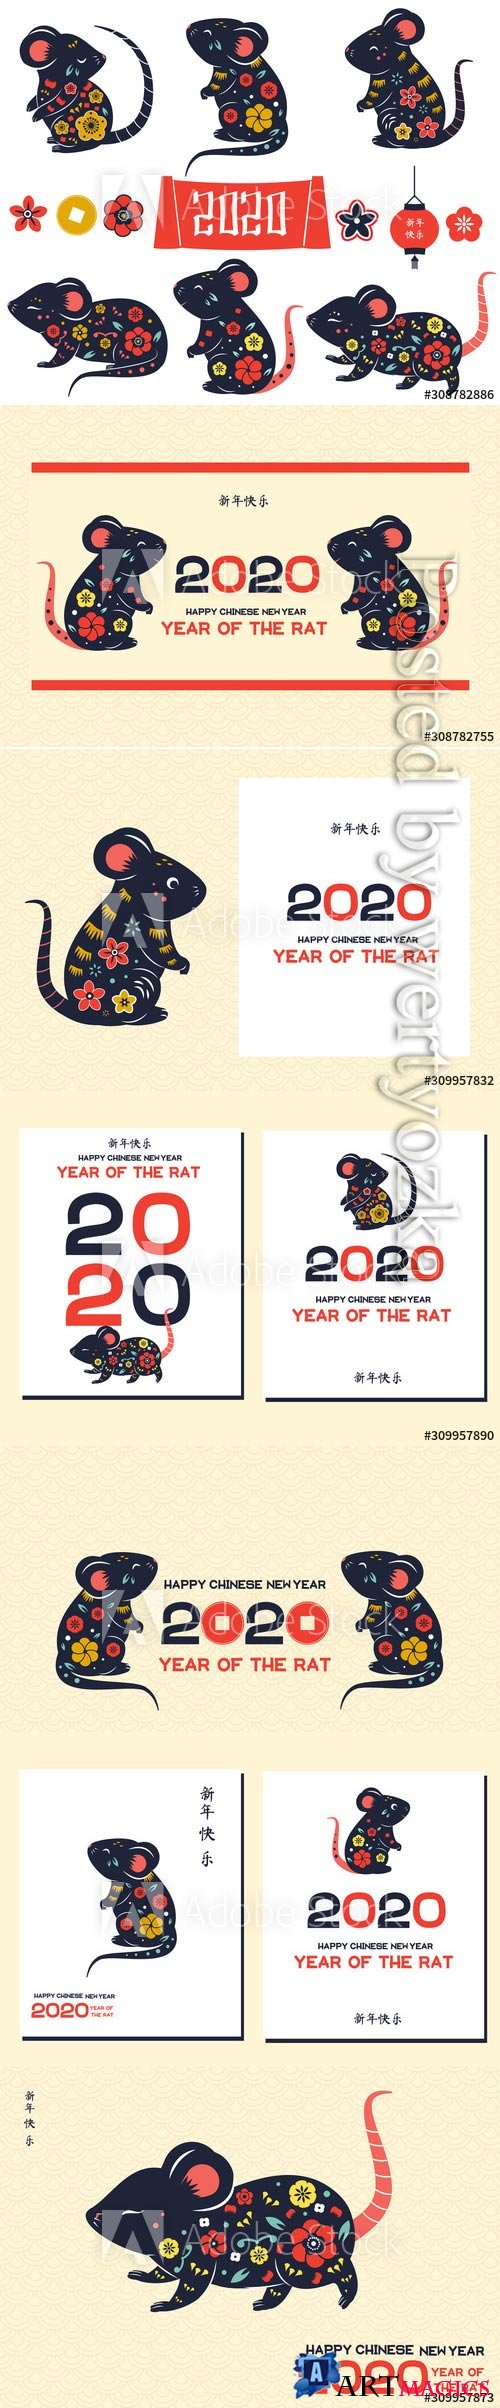 2020 year of rat, Chinese new year banner with decorated mouse